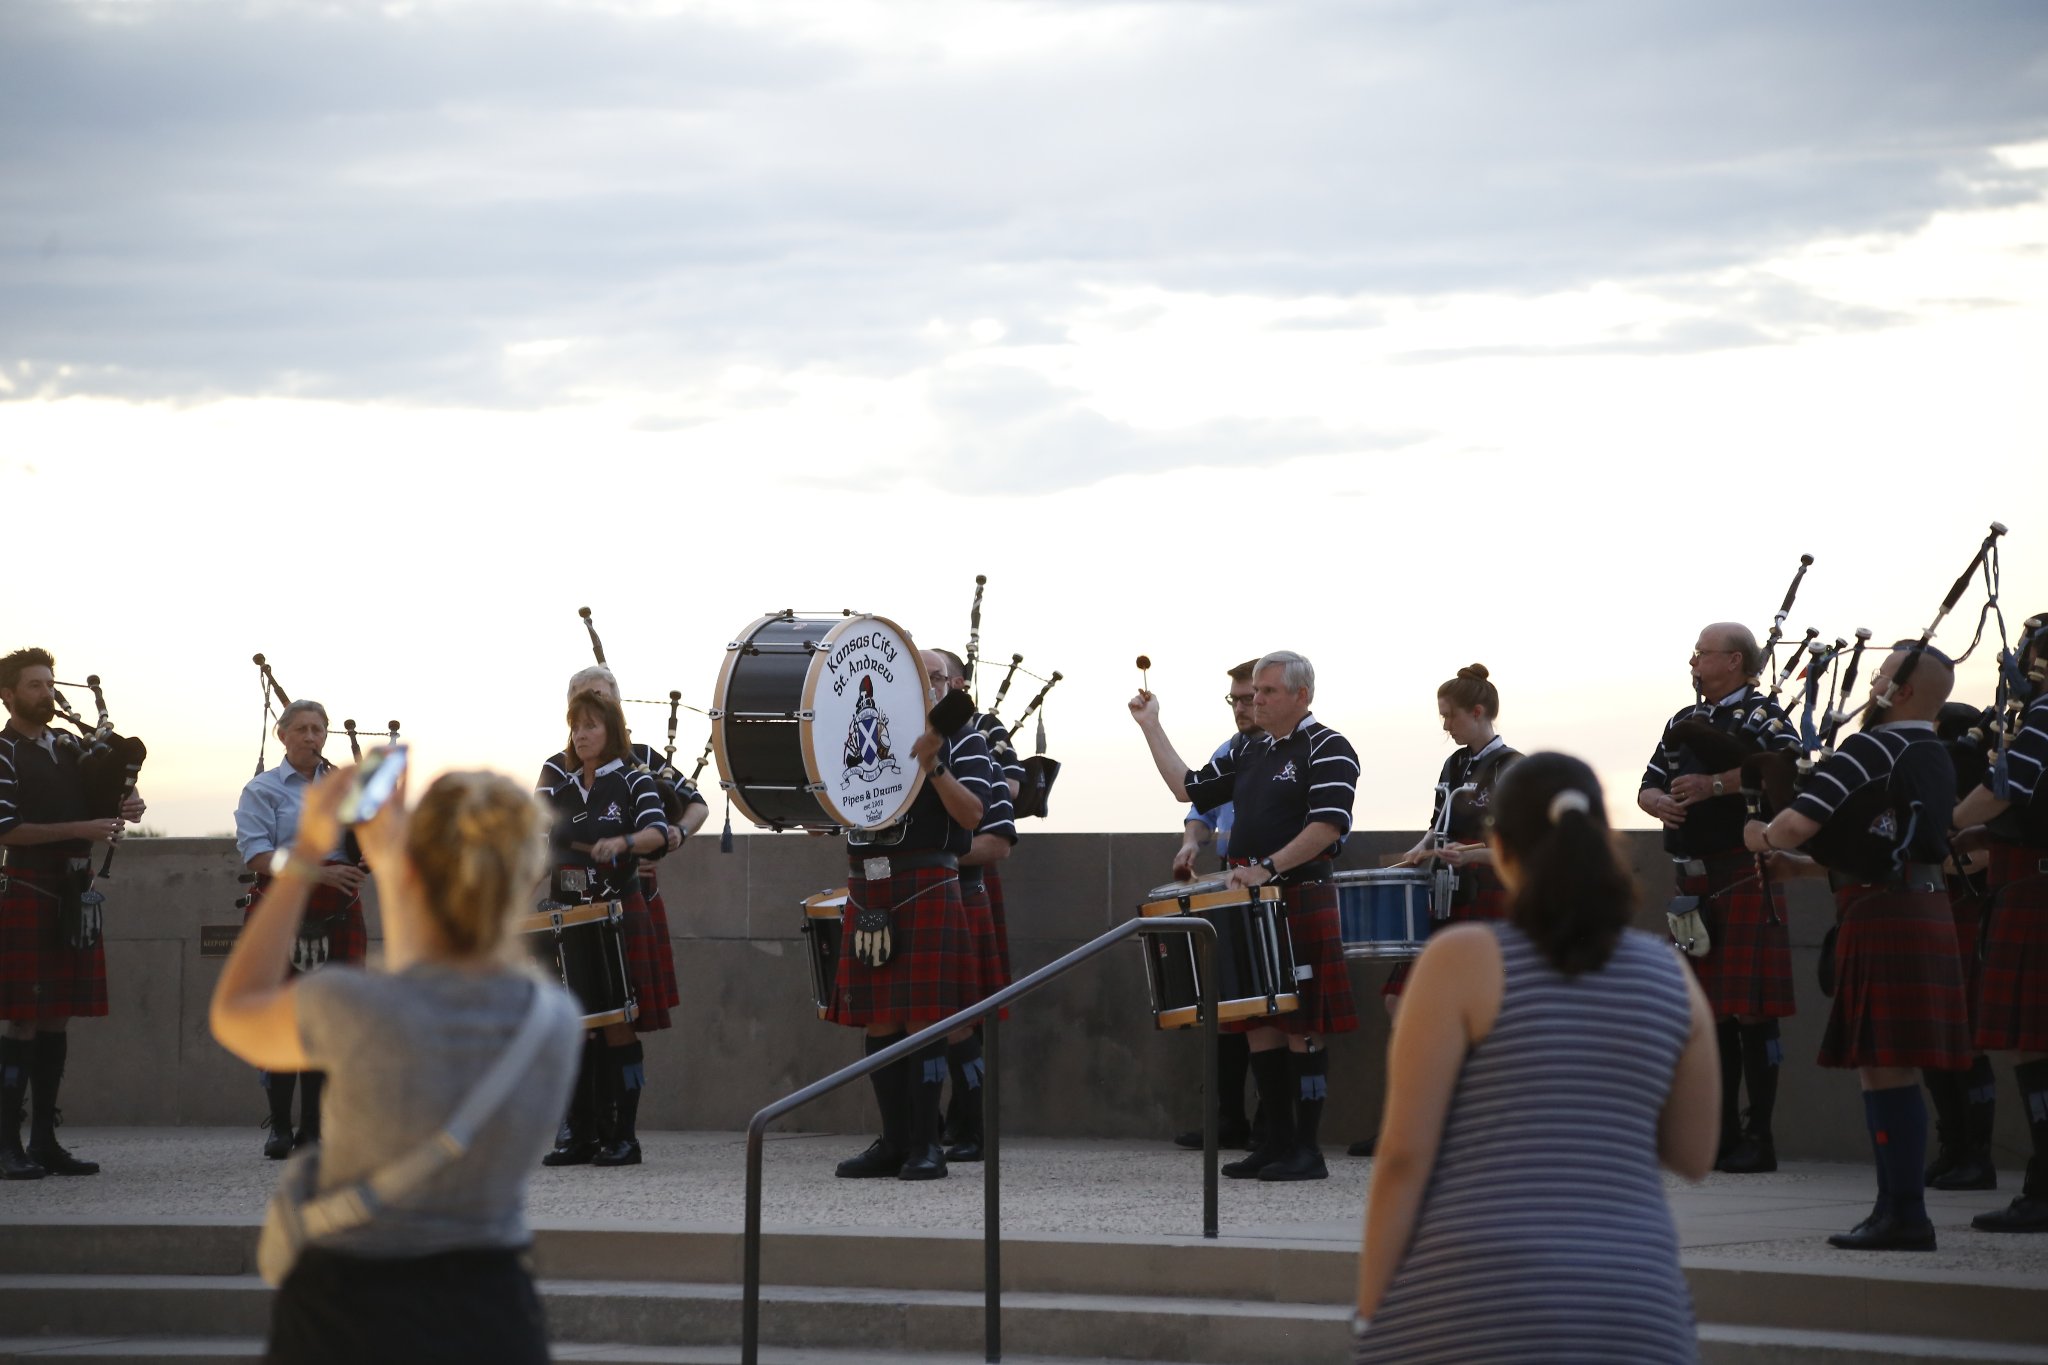 Modern photograph of a large band of people wearing kilts standing on Memorial Courtyard. They are playing a variety of drums and bagpipes. Onlookers take photos on them.